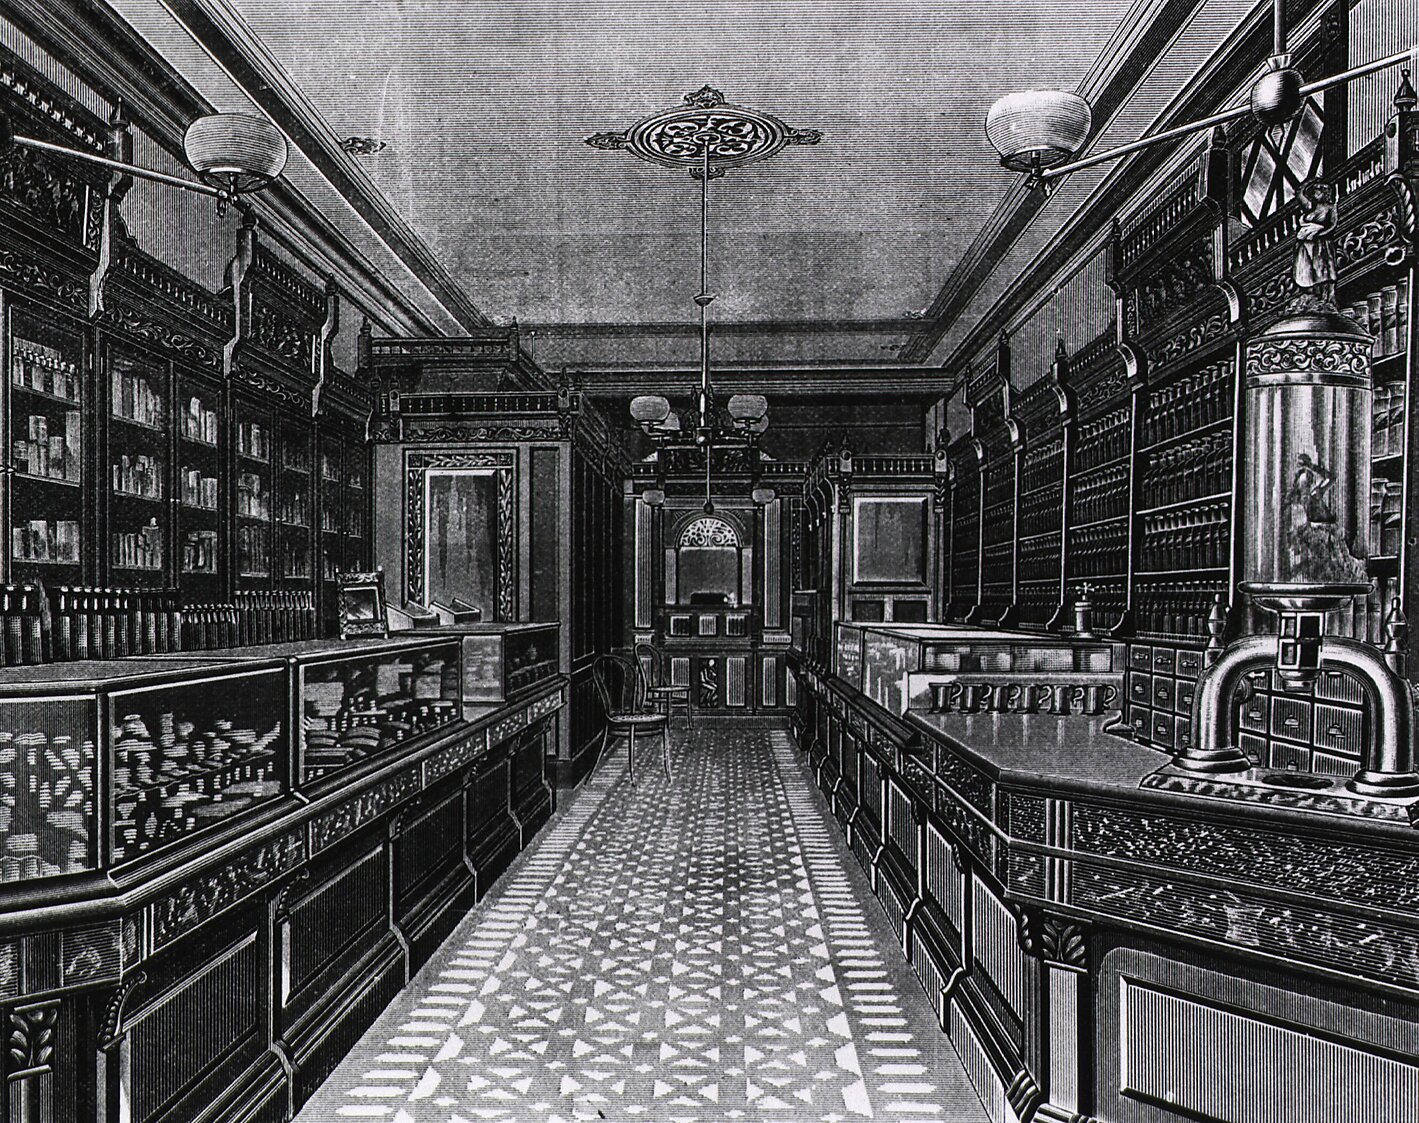 Illustration of a typical drugstore of the 1880's, featuring walls lined with medicine behind counters.